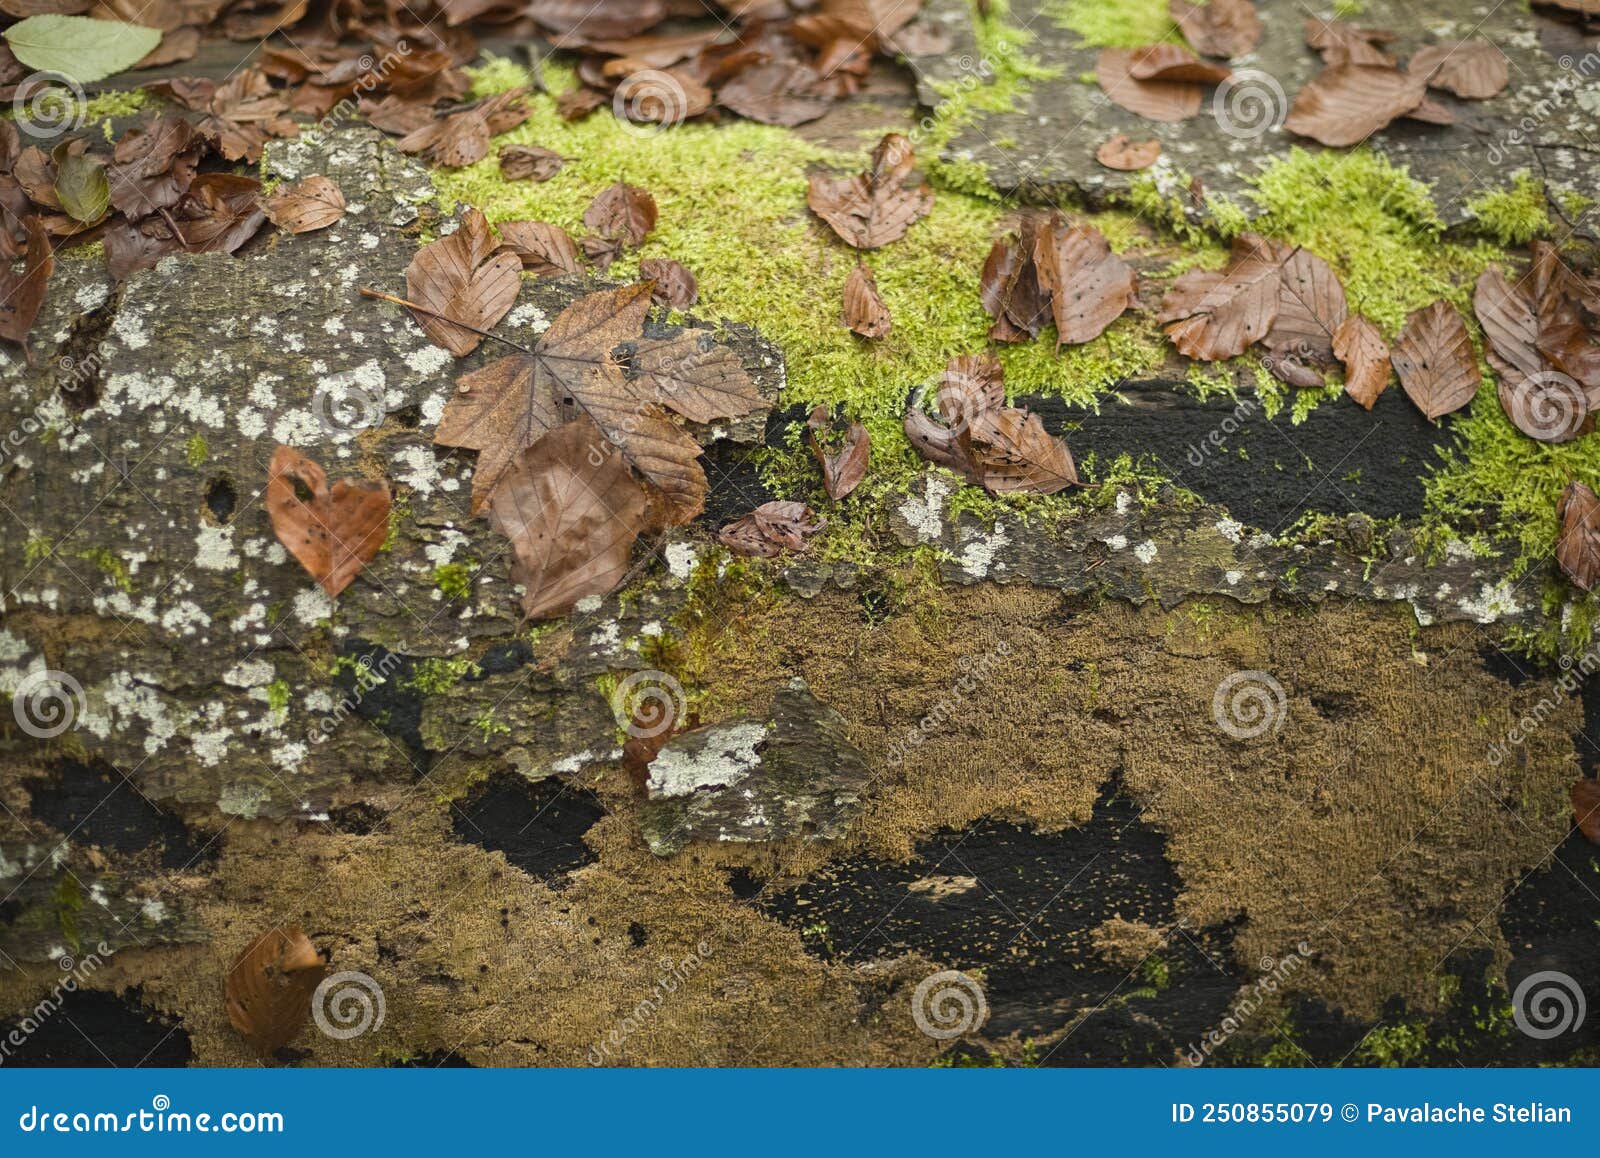 a variety of autumn (fall) leaves in brown and golden hues on wet soil of woodland floor.